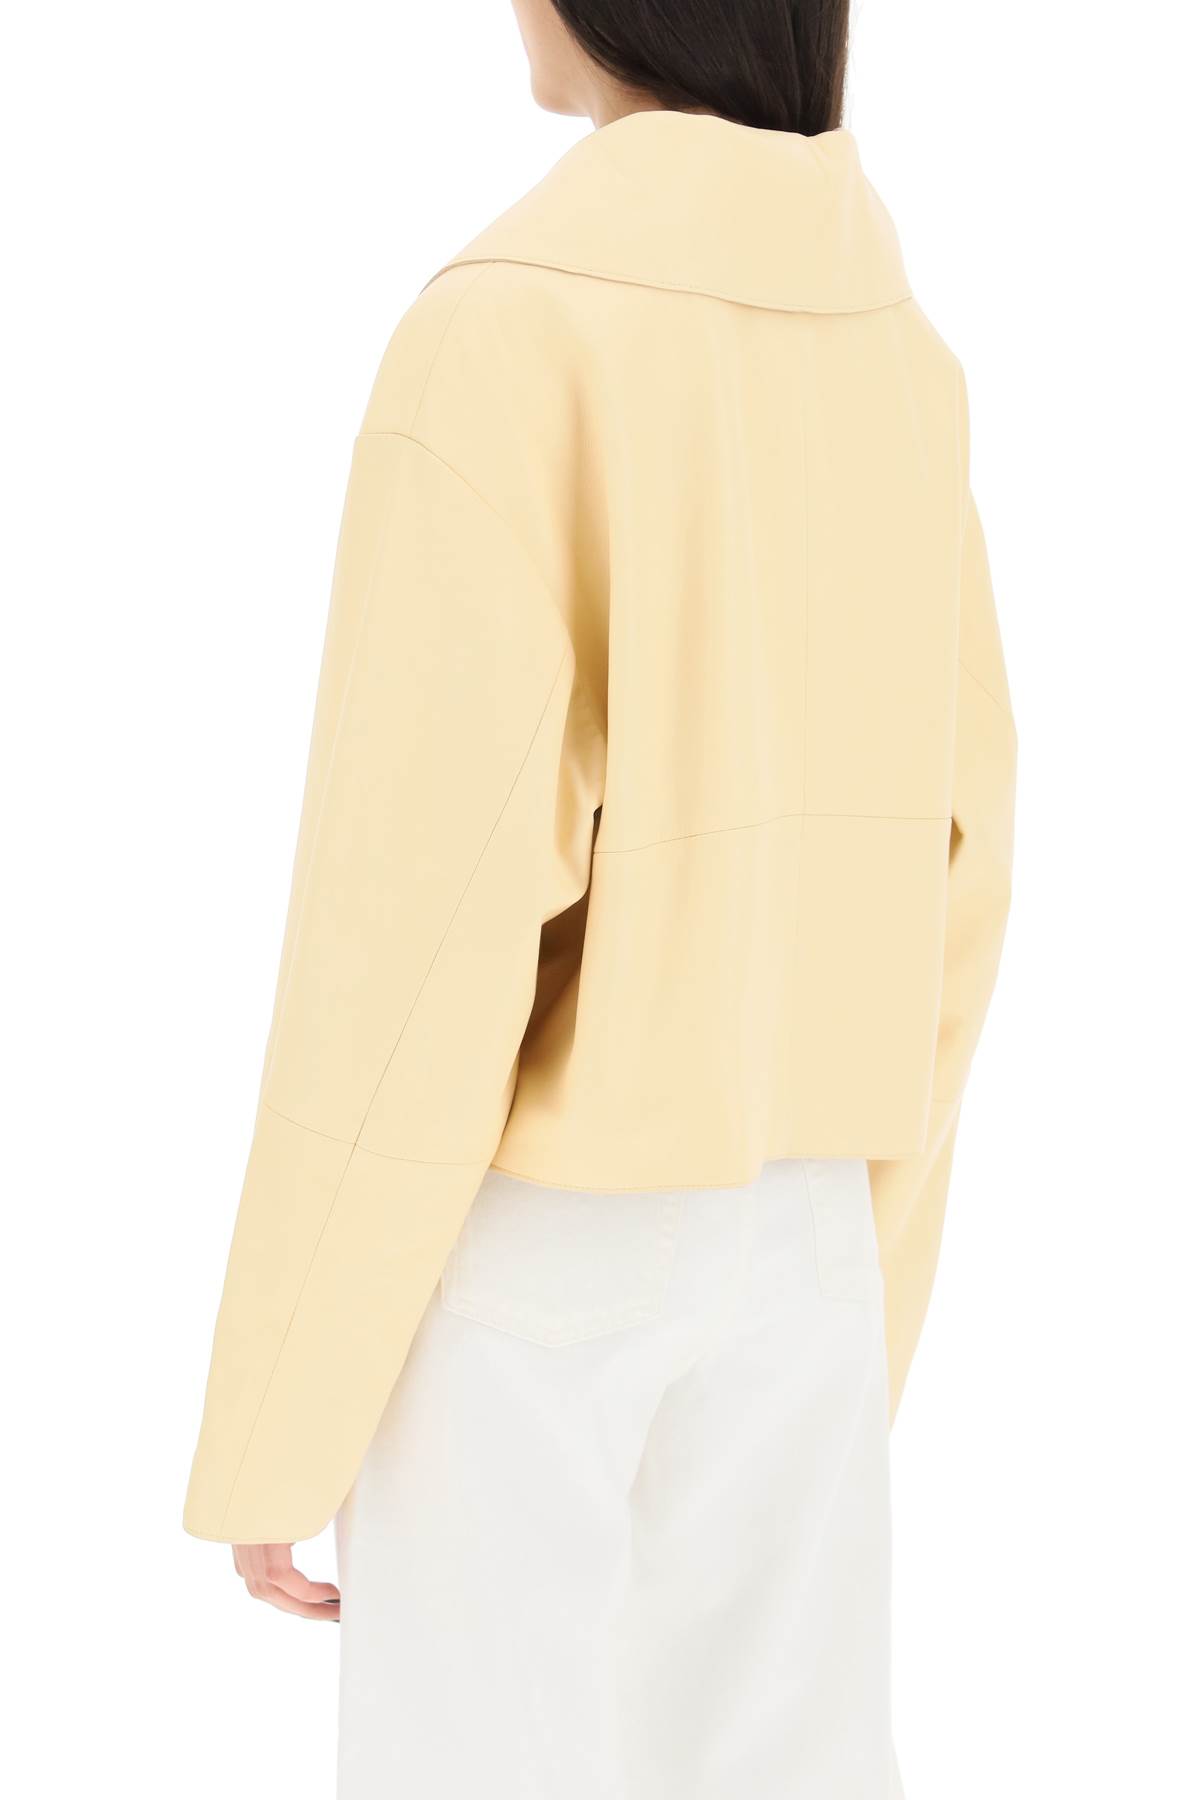 Shop Loulou Studio Sulat Leather Jacket In Cream (yellow)